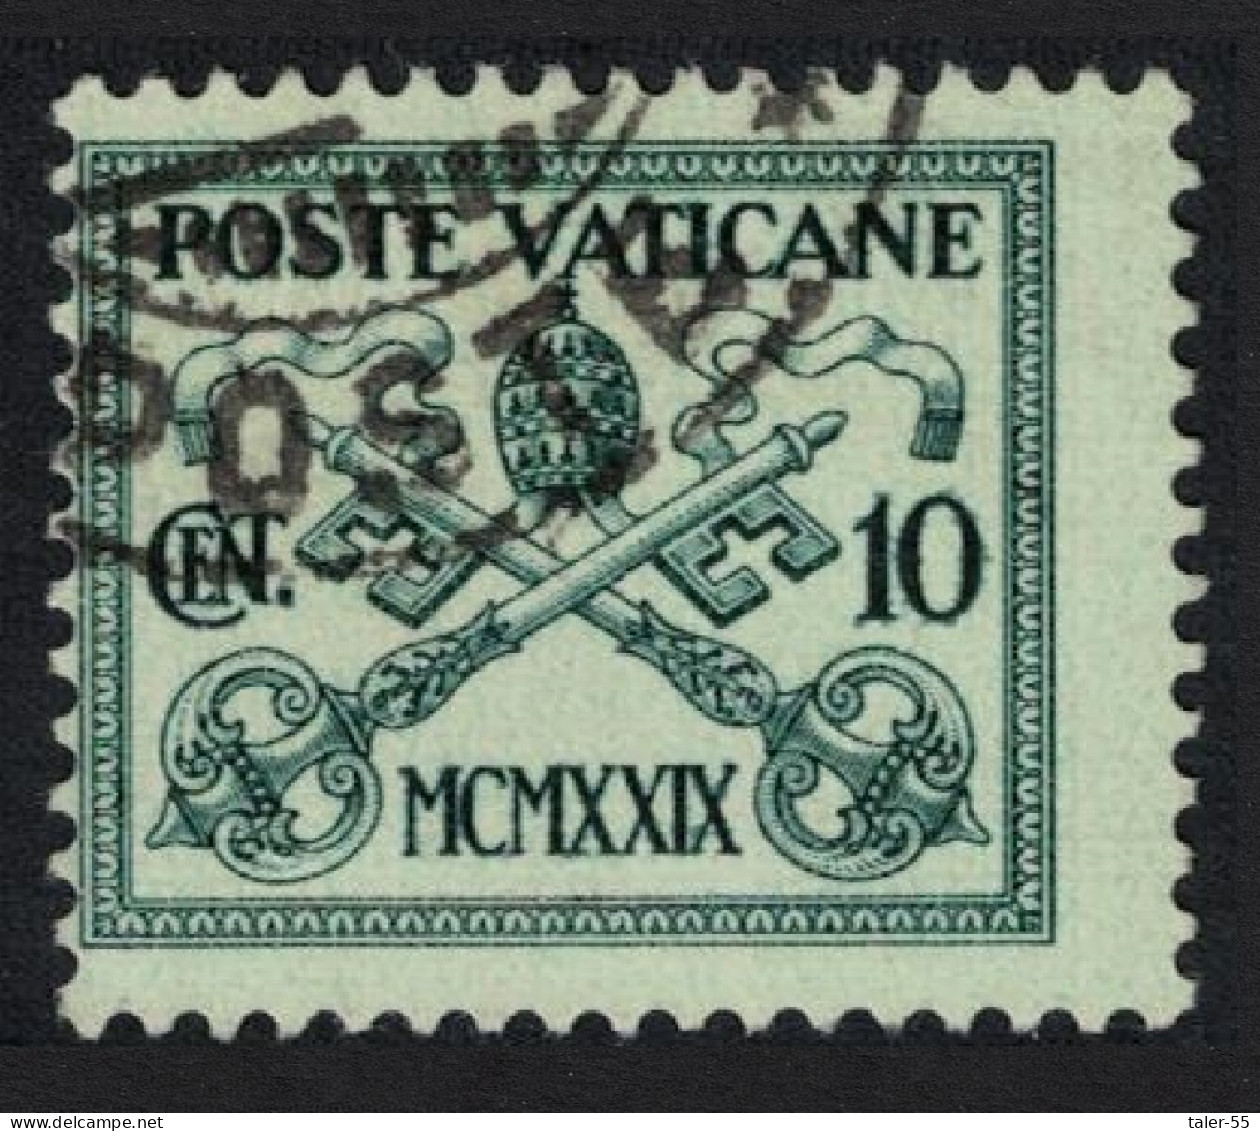 Vatican Papal Tiara And St Peter's Keys 10c FIRST ISSUE 1929 Canc SG#2 MI#2 Sc#2 - Usados